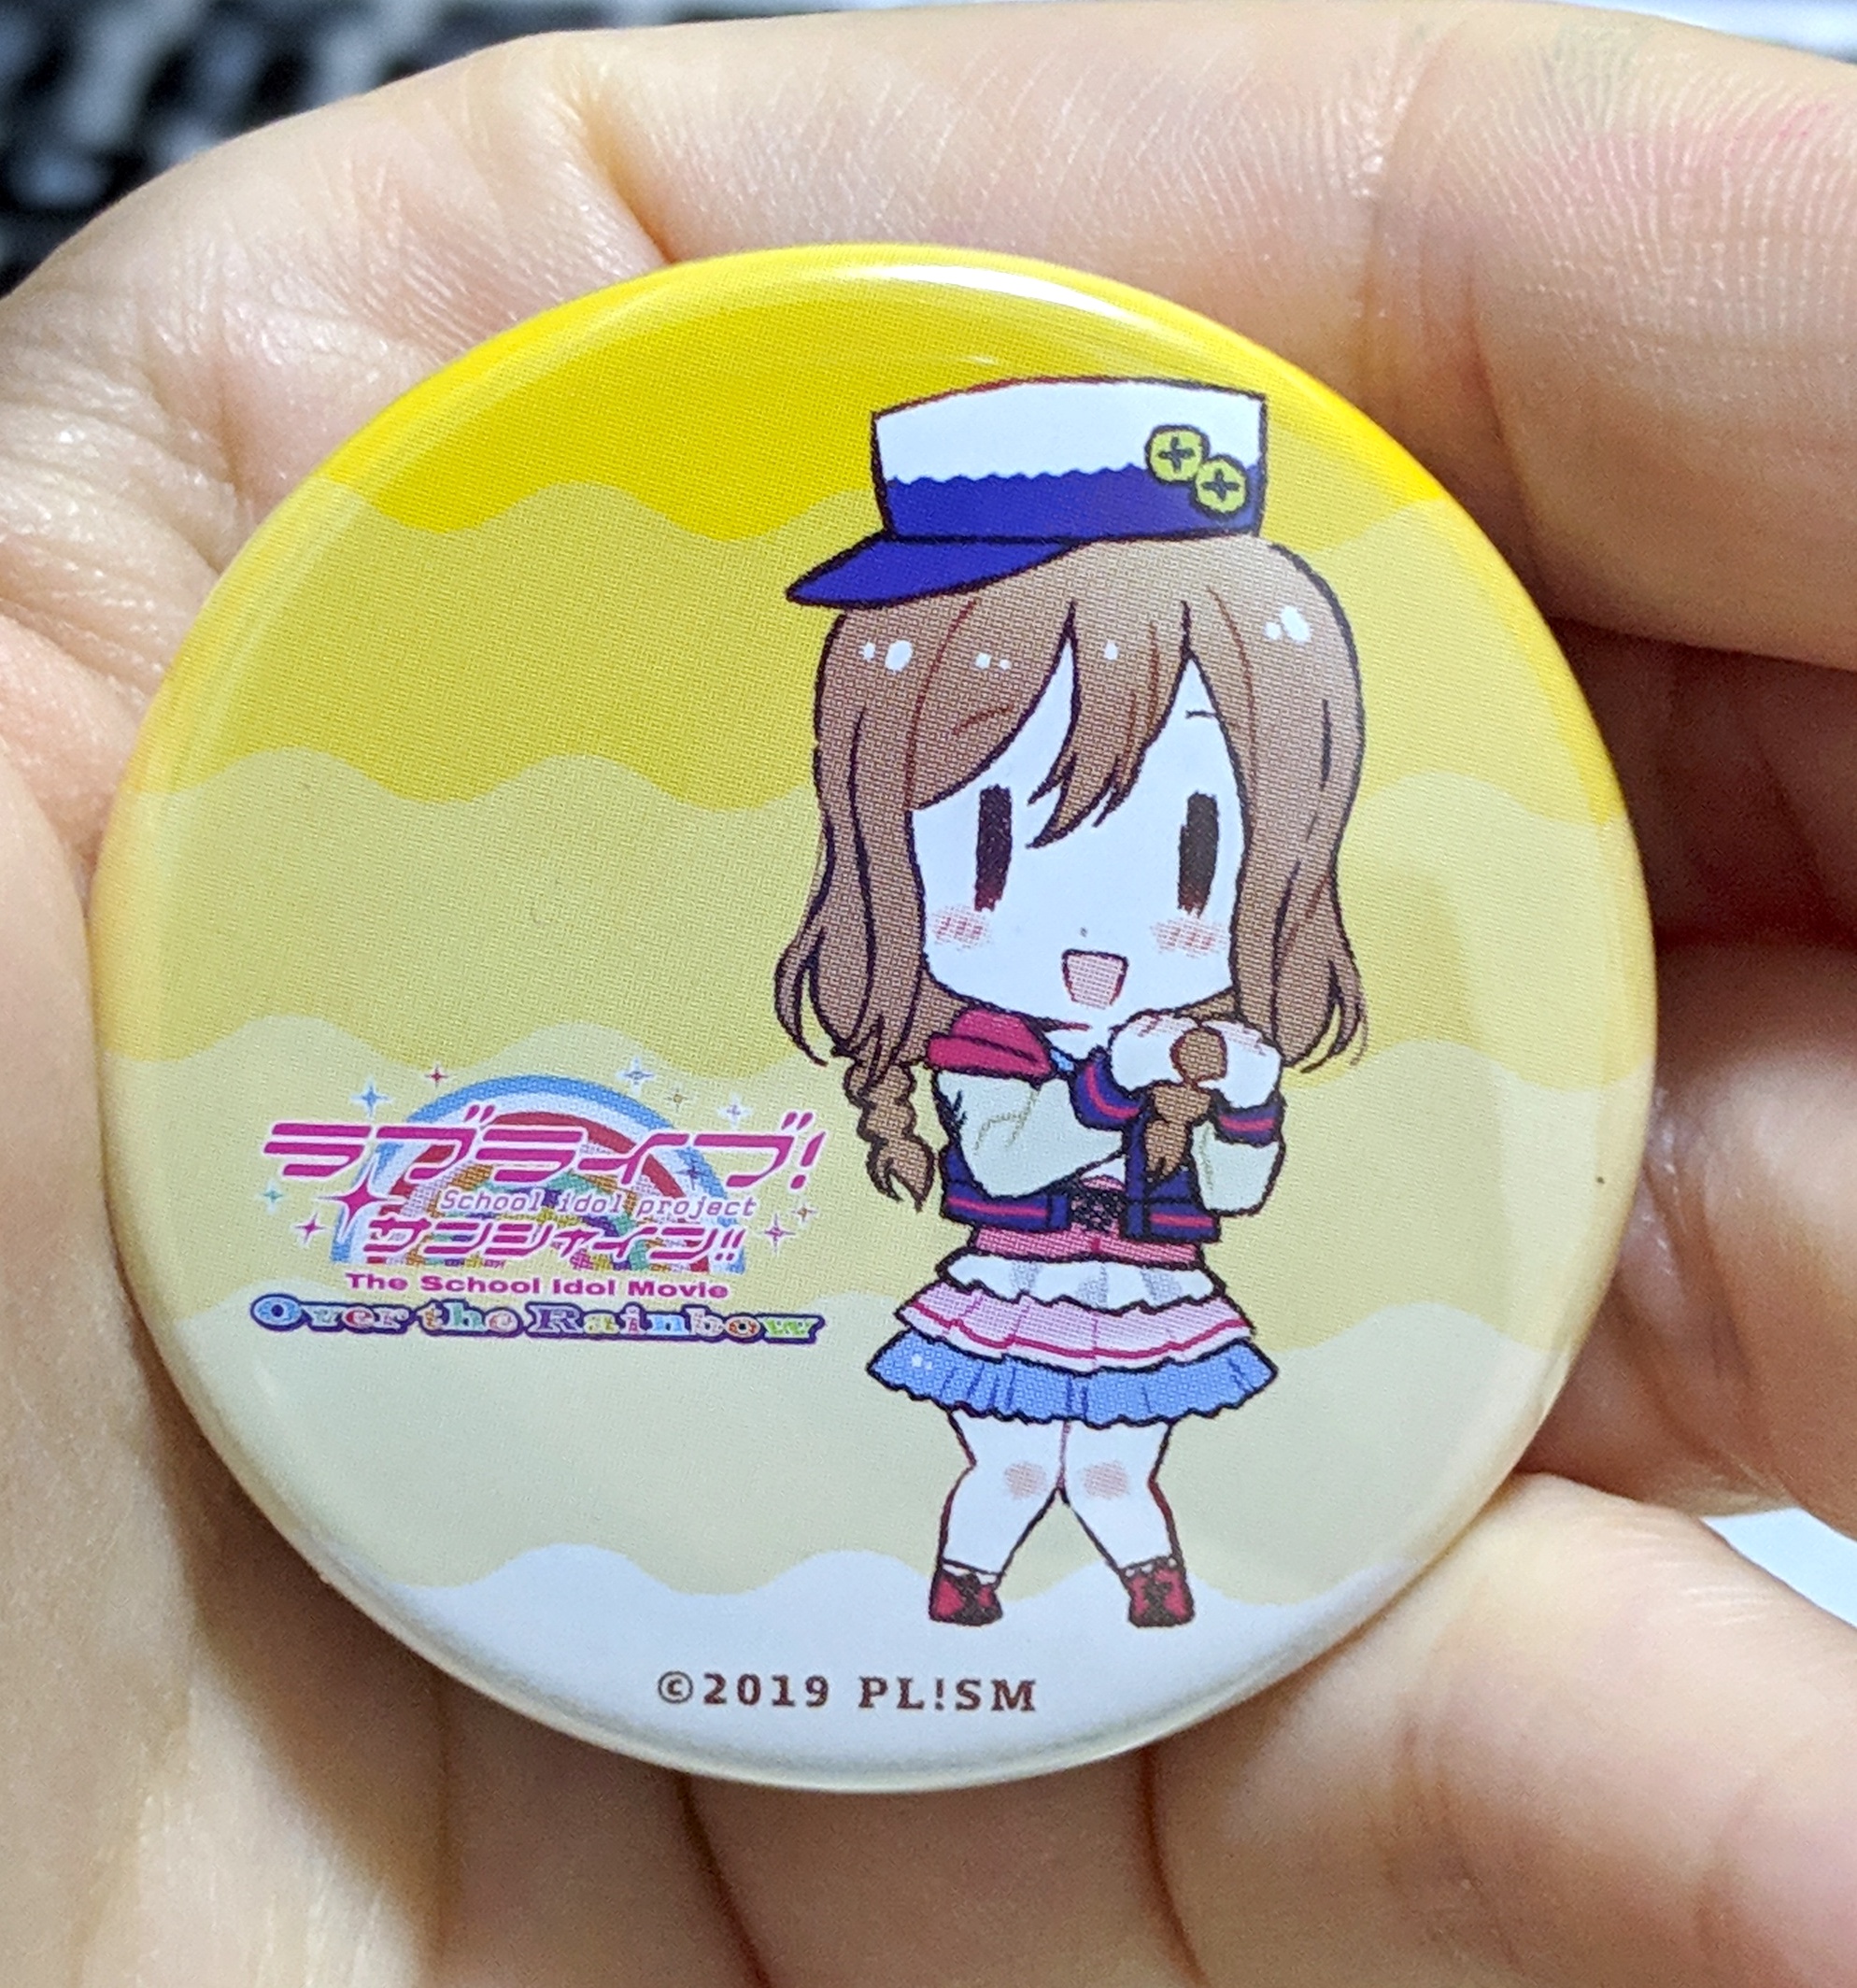 Exclusive limited pin badge from Love Live! Sunshine!! The School Idol Movie: Over The Rainbow